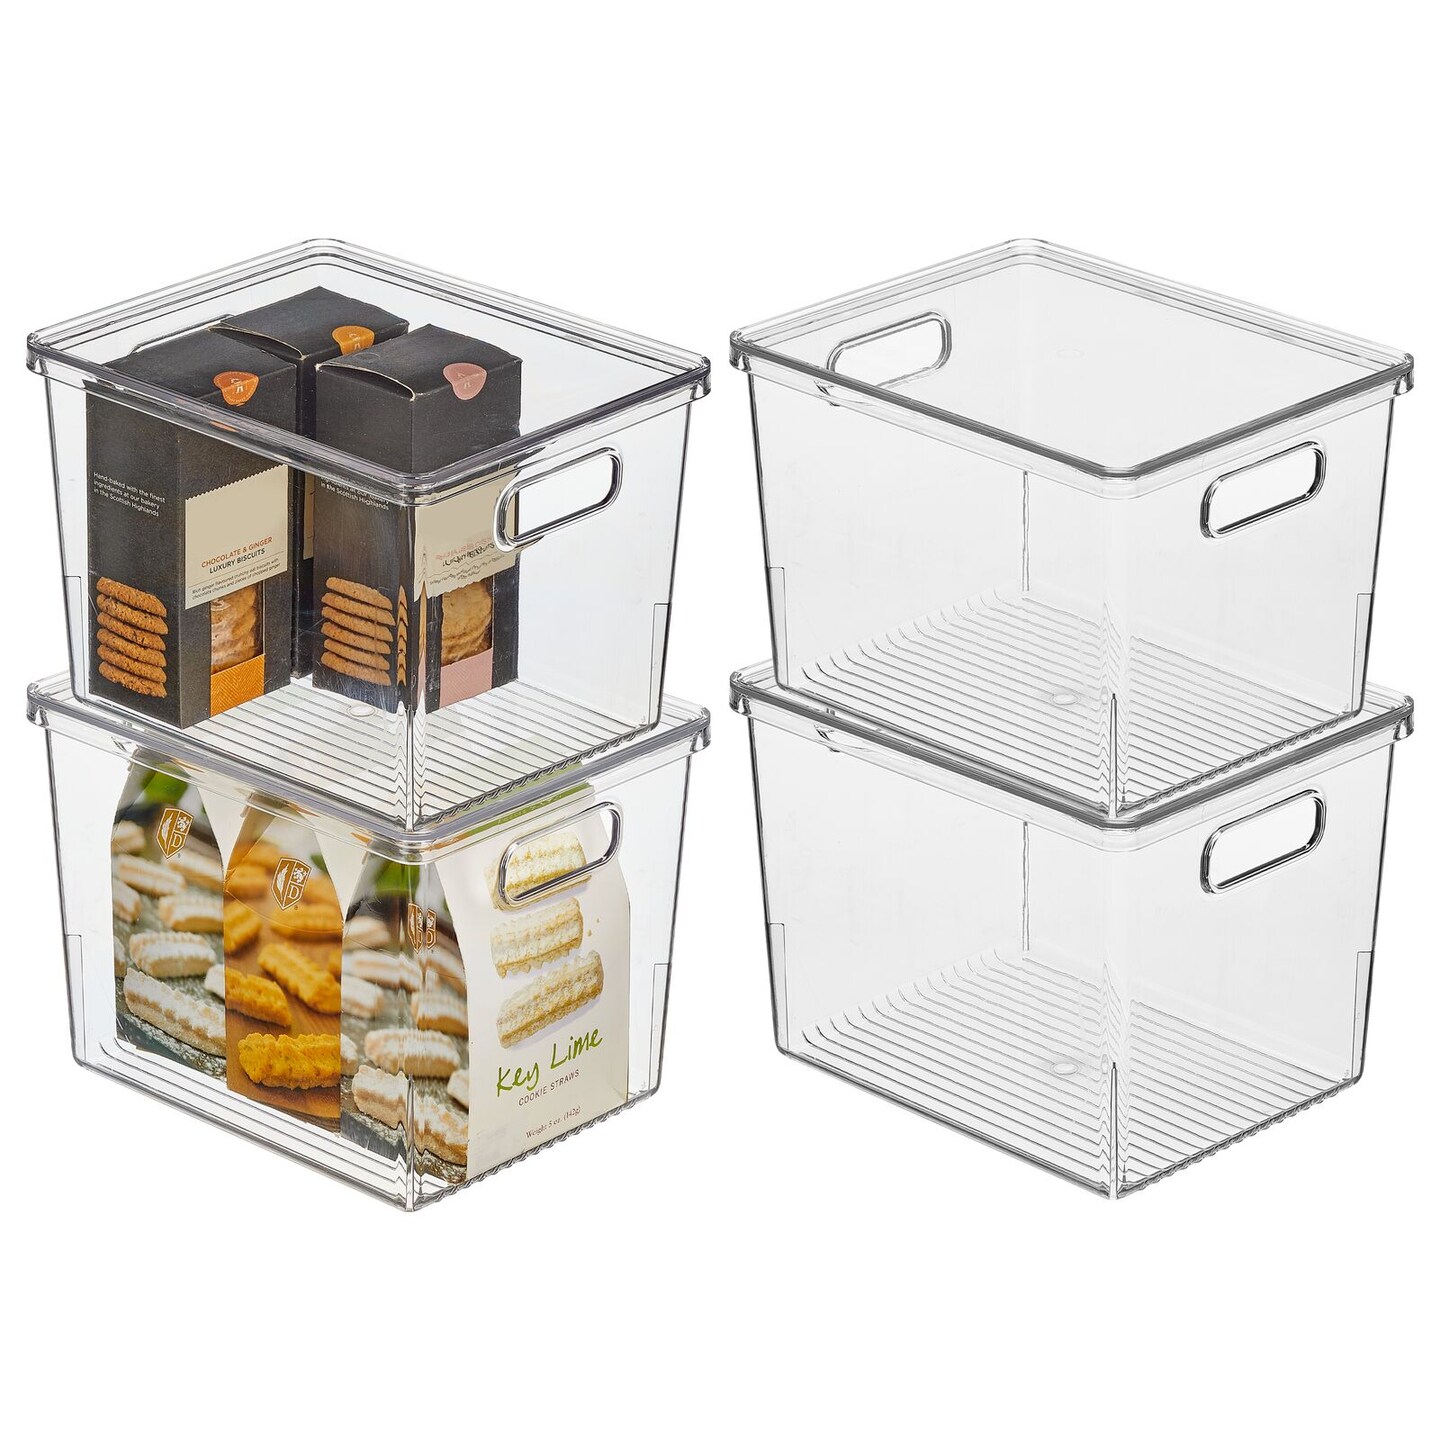 mDesign Plastic Deep Storage Bin Box Container with Lid and Built